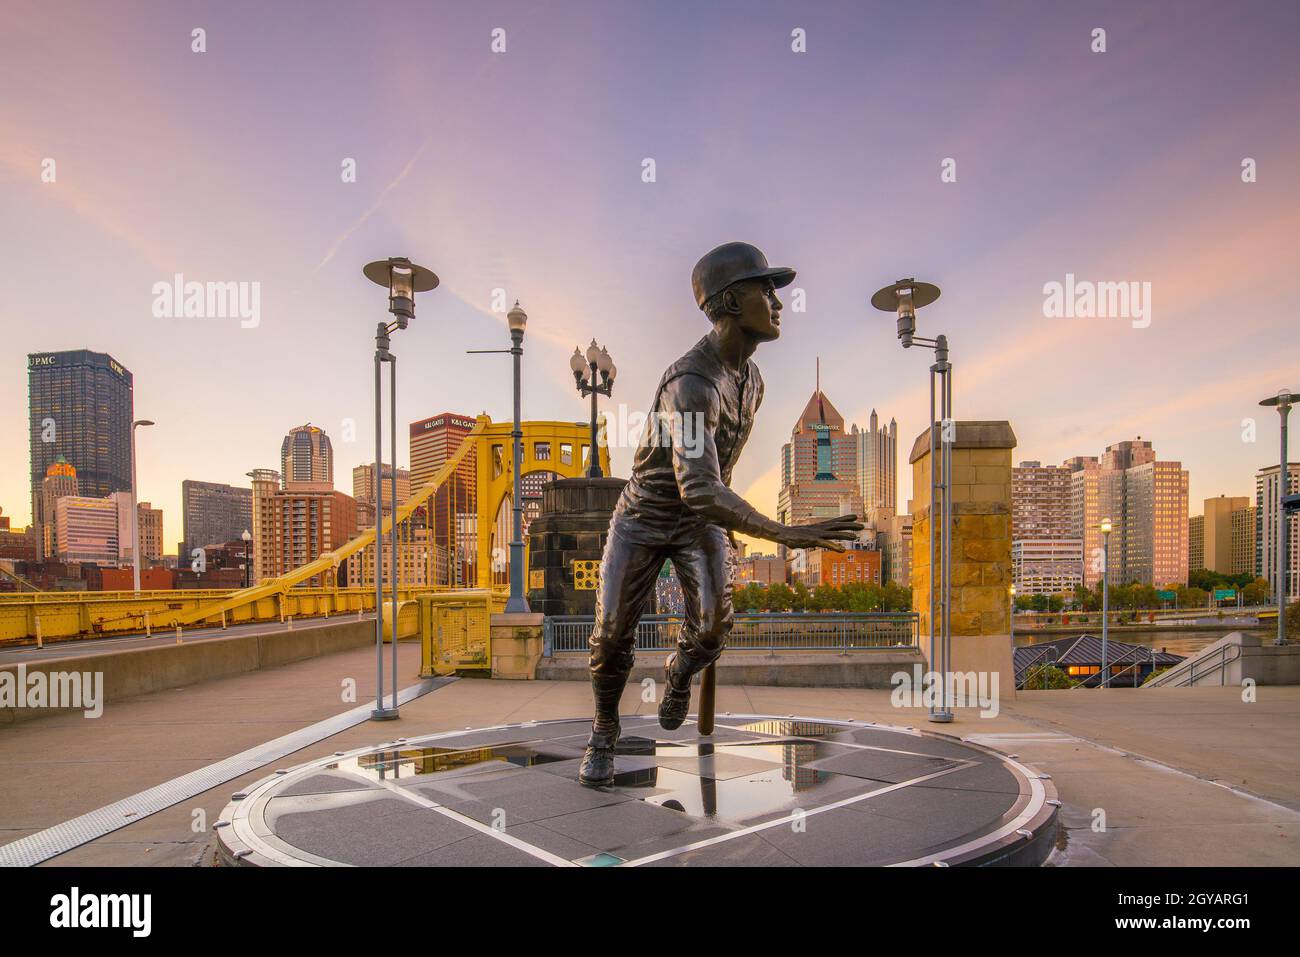 PITTSBURGH, USA - OCT 30: PNC Baseball Park in Pittsburgh, Pennsylvania on October 30, 2016. PNC Park has been home to the Pittsburgh Pirates since 20 Stock Photo